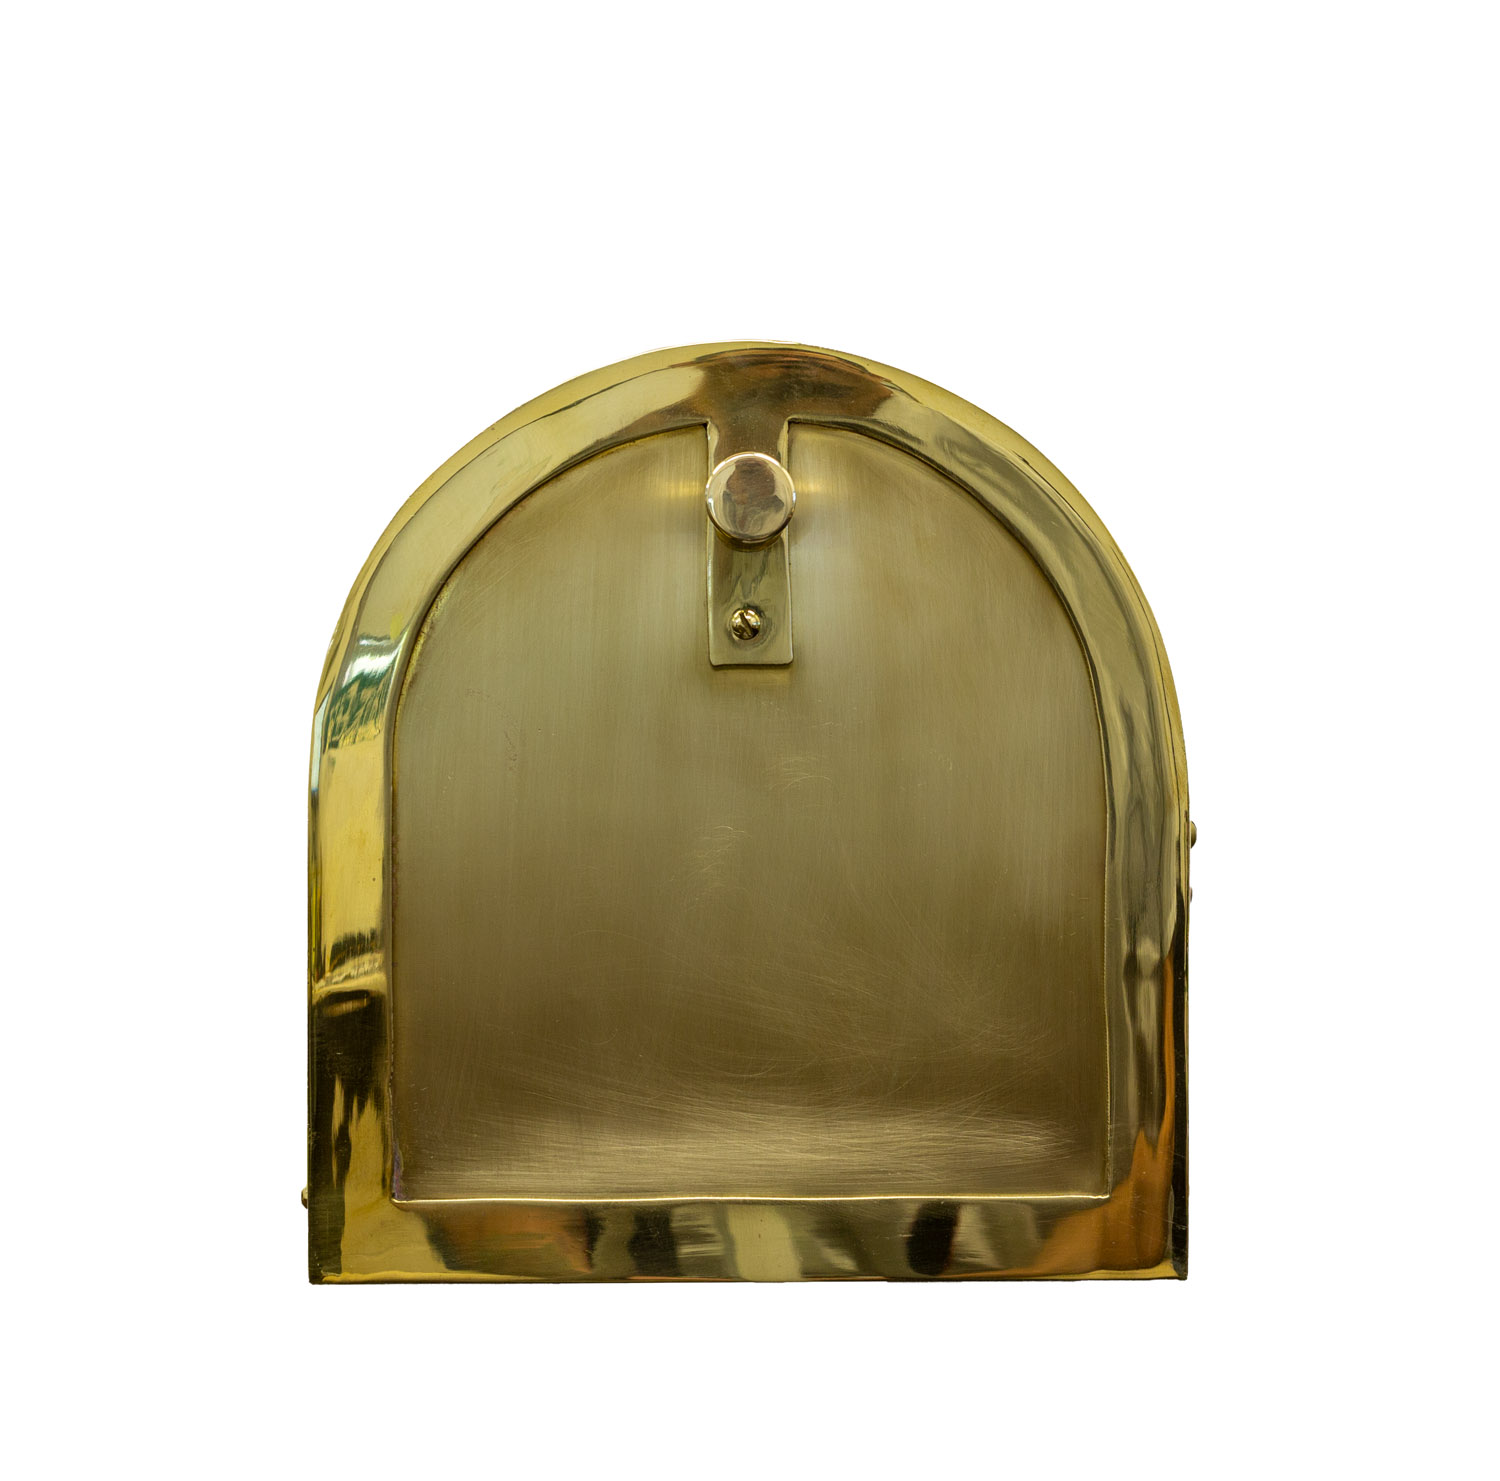 Provincial Collection Brass Mailboxes (Rural) Mb-3000 Polished Brass - image 2 of 3